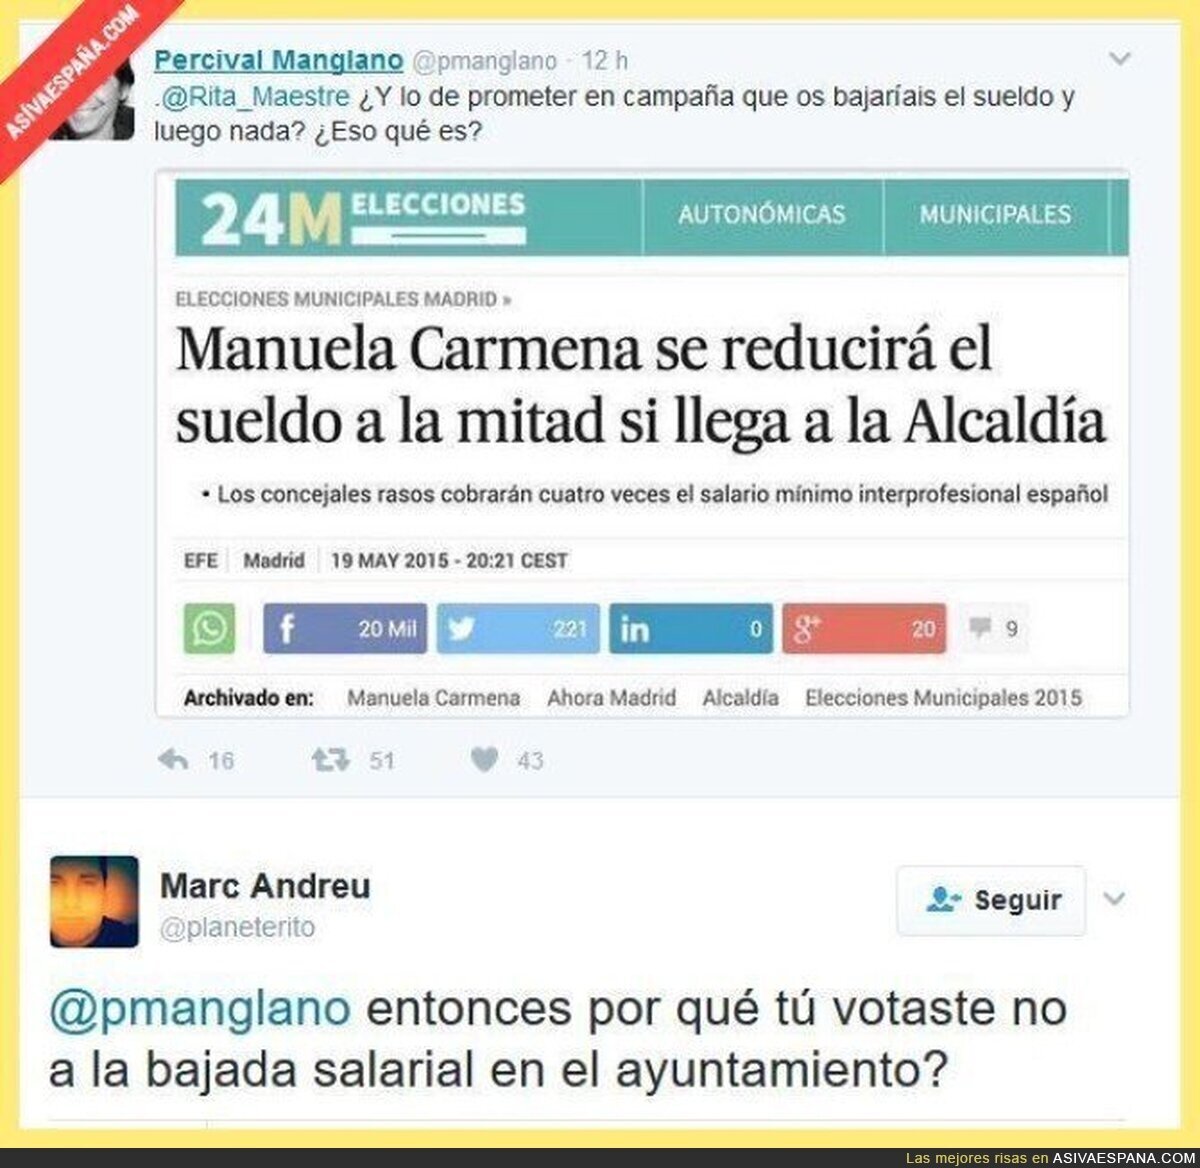 Error 404: coherencia not found